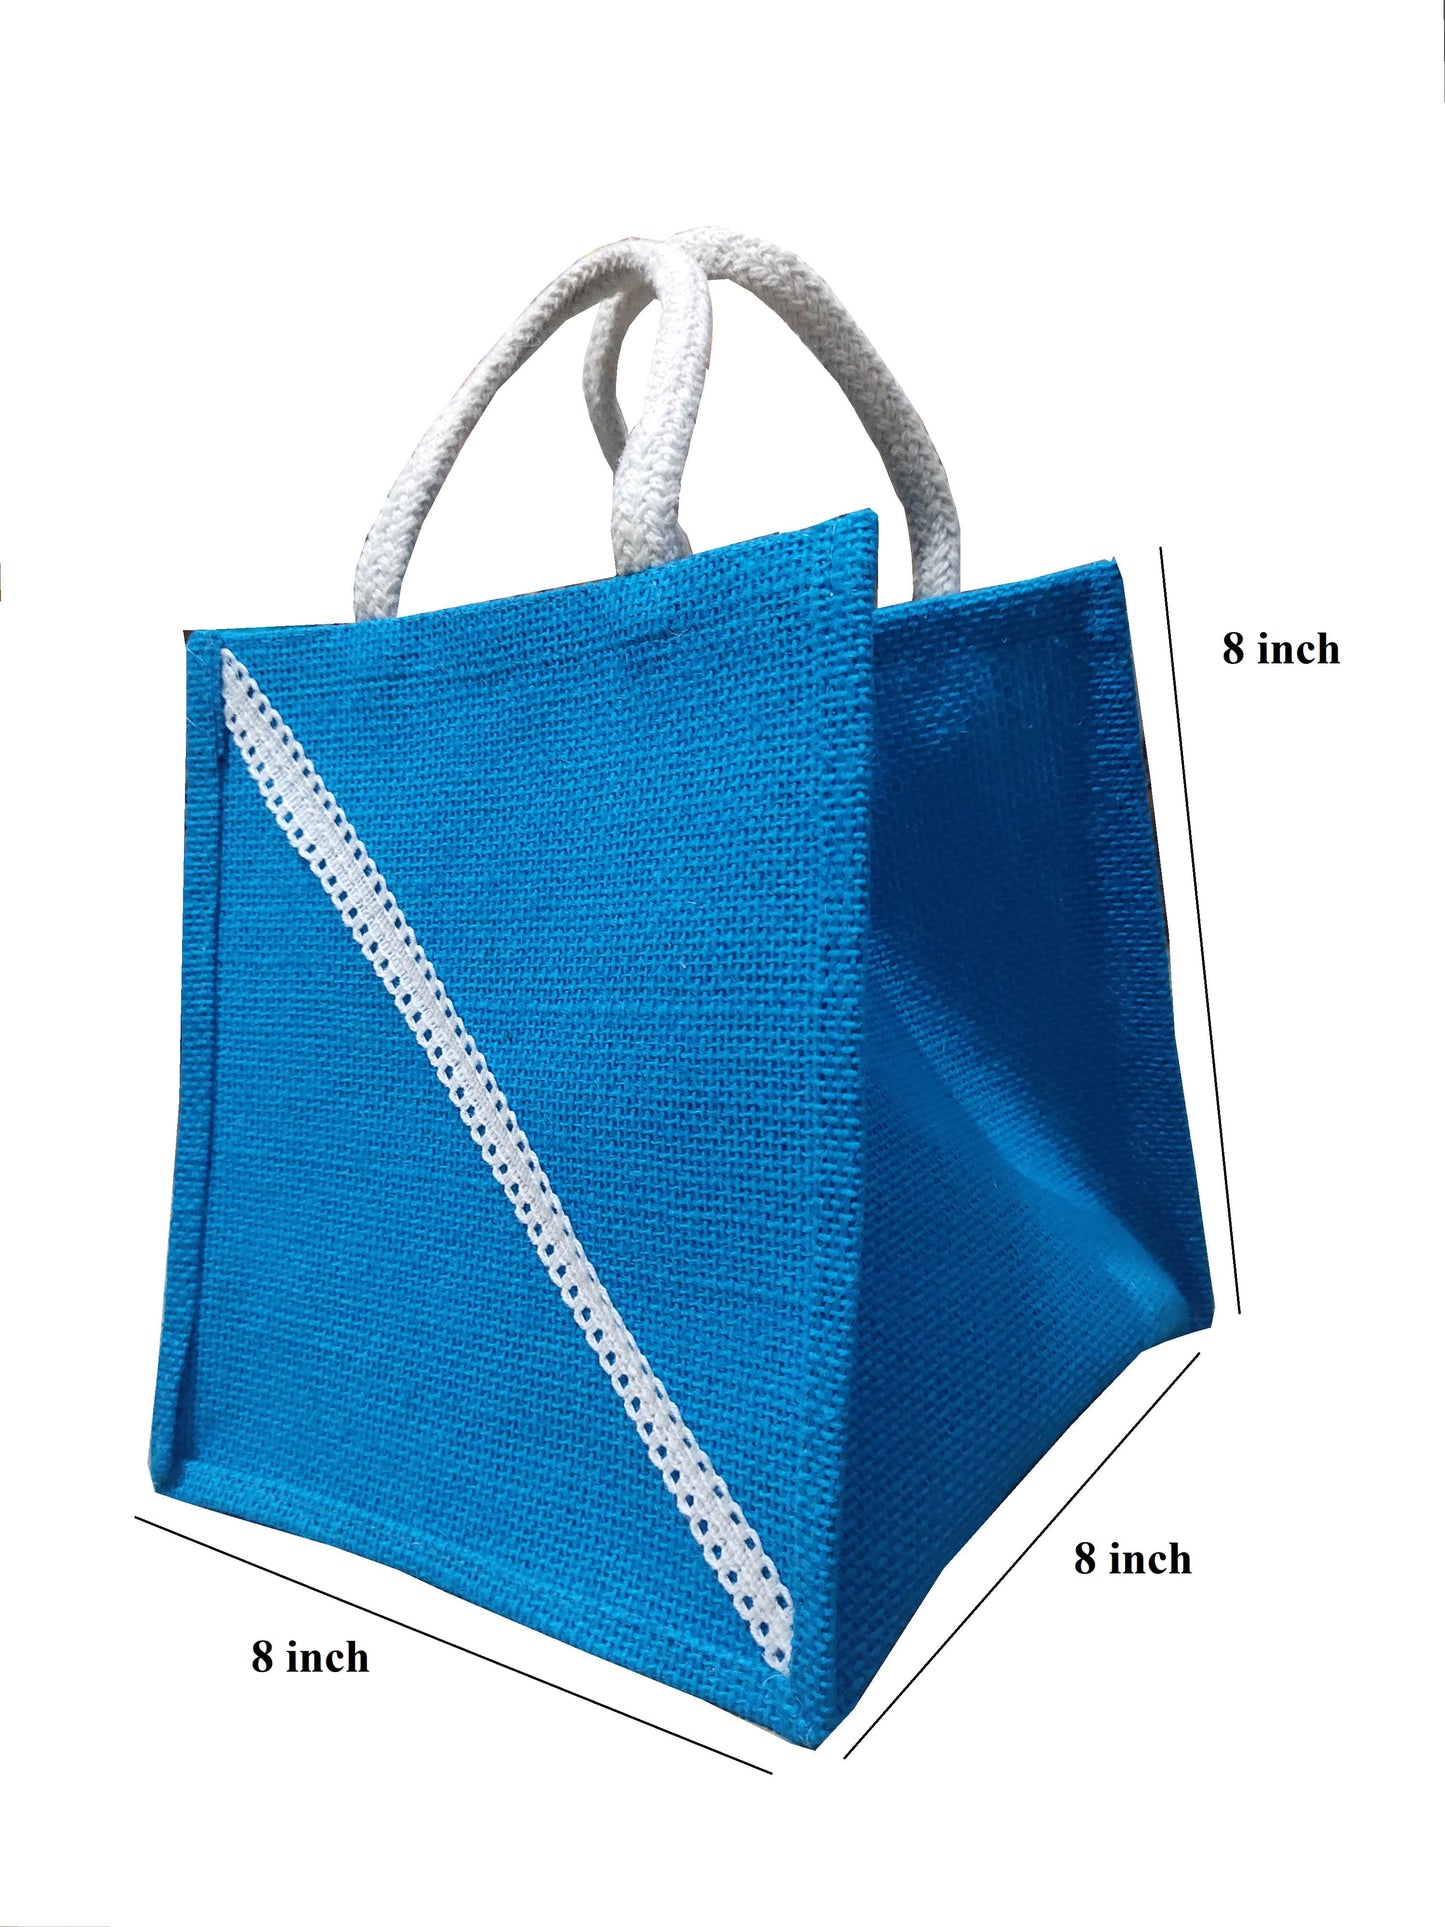 Handmakers Small Jute Gift Bags with Blue Green color for Gifts (Set of 2)